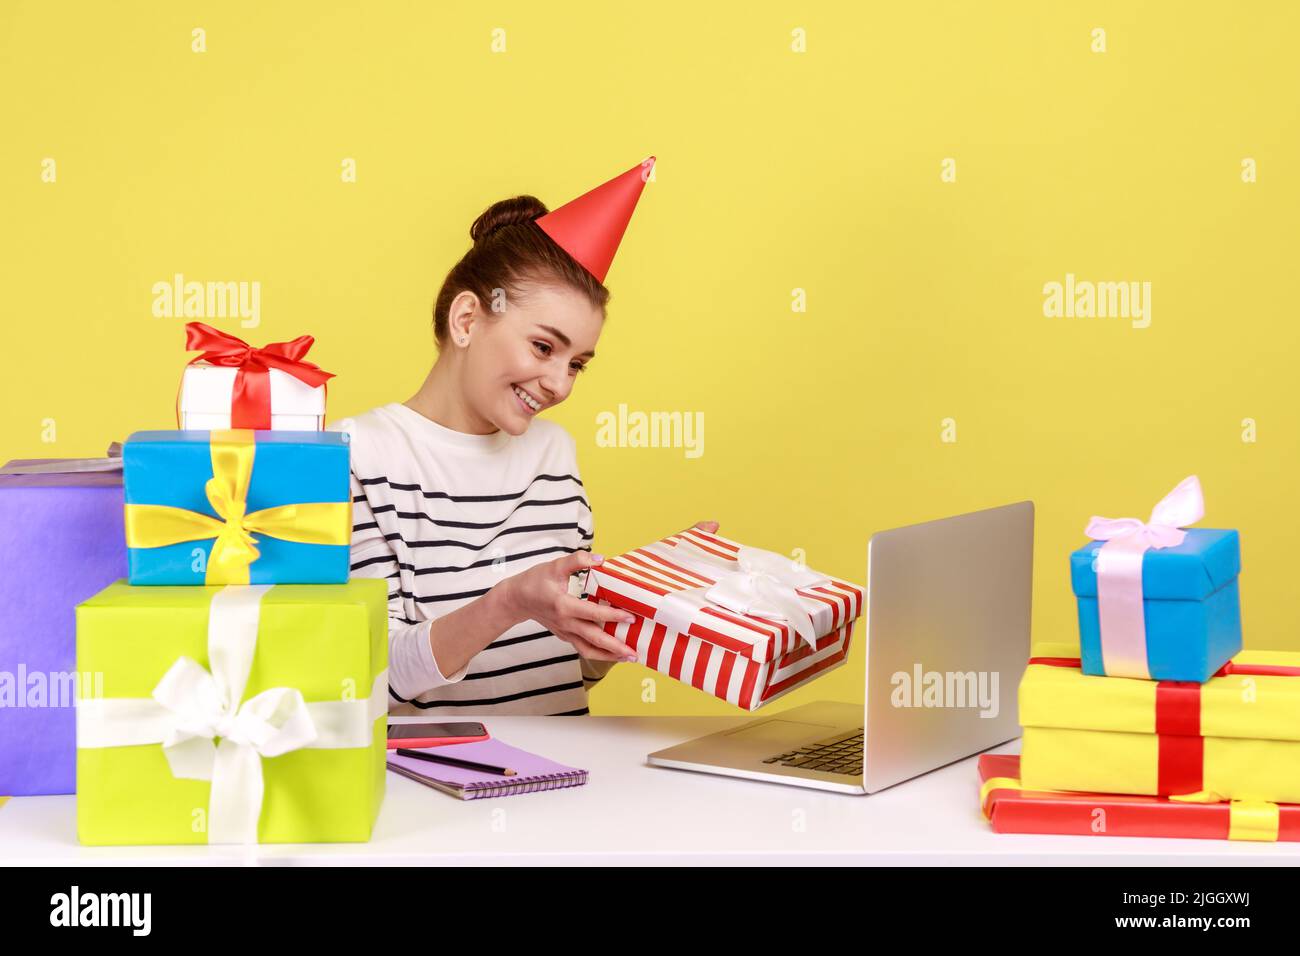 Cheerful woman holding gift box and looking at laptop screen, giving birthday present while having online communication, distant celebration. Indoor studio studio shot isolated on yellow background. Stock Photo